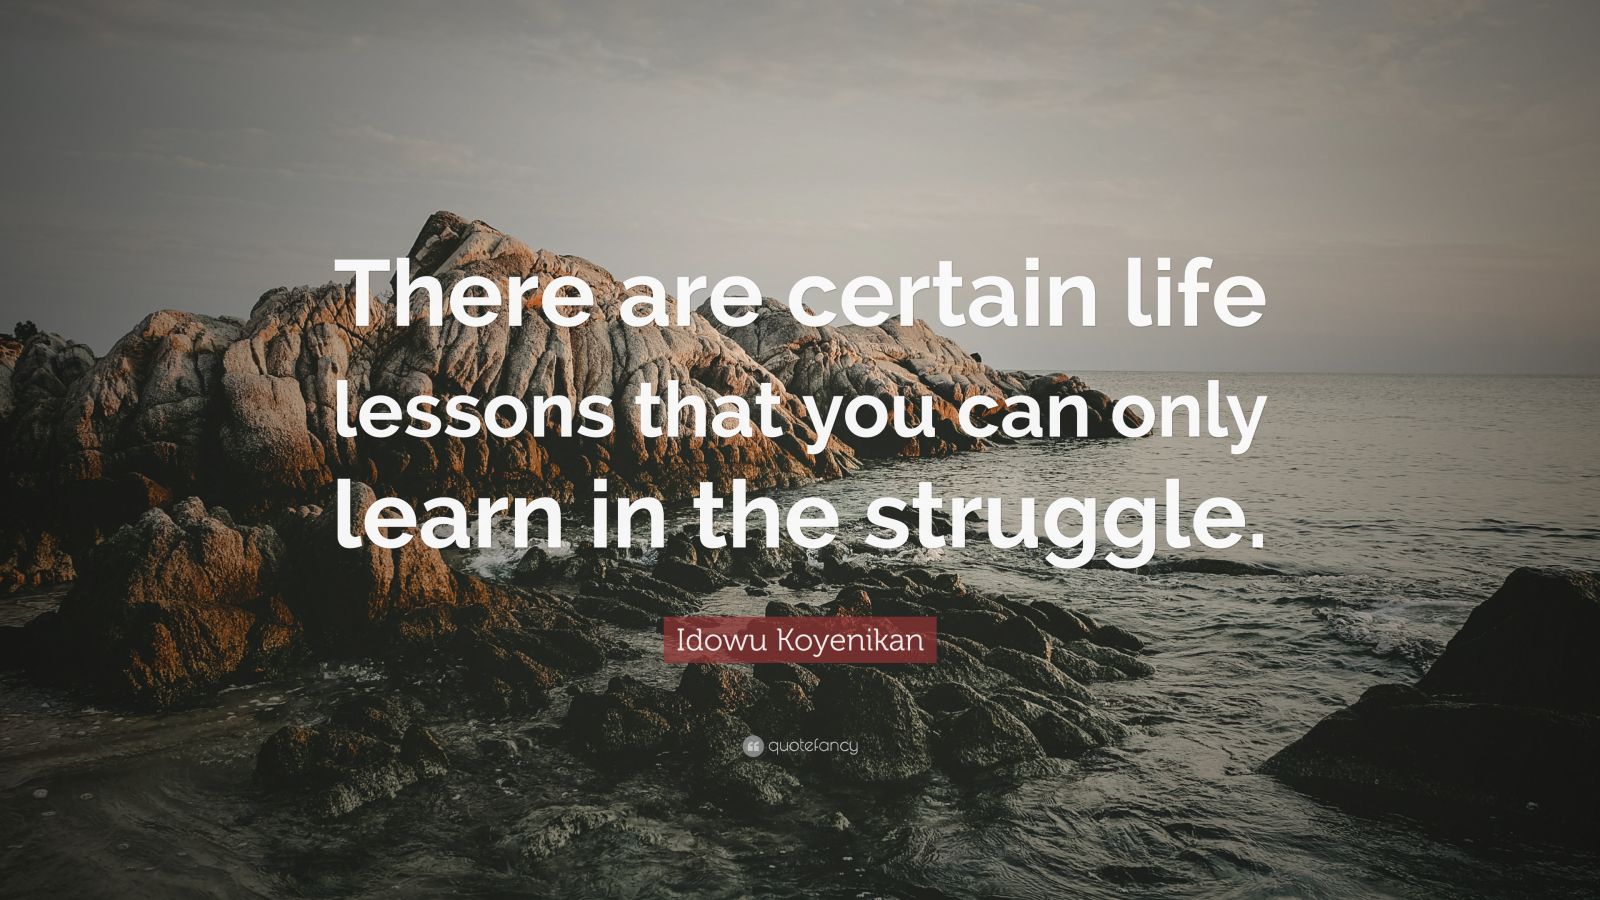 Idowu Koyenikan Quote: “There are certain life lessons that you can ...